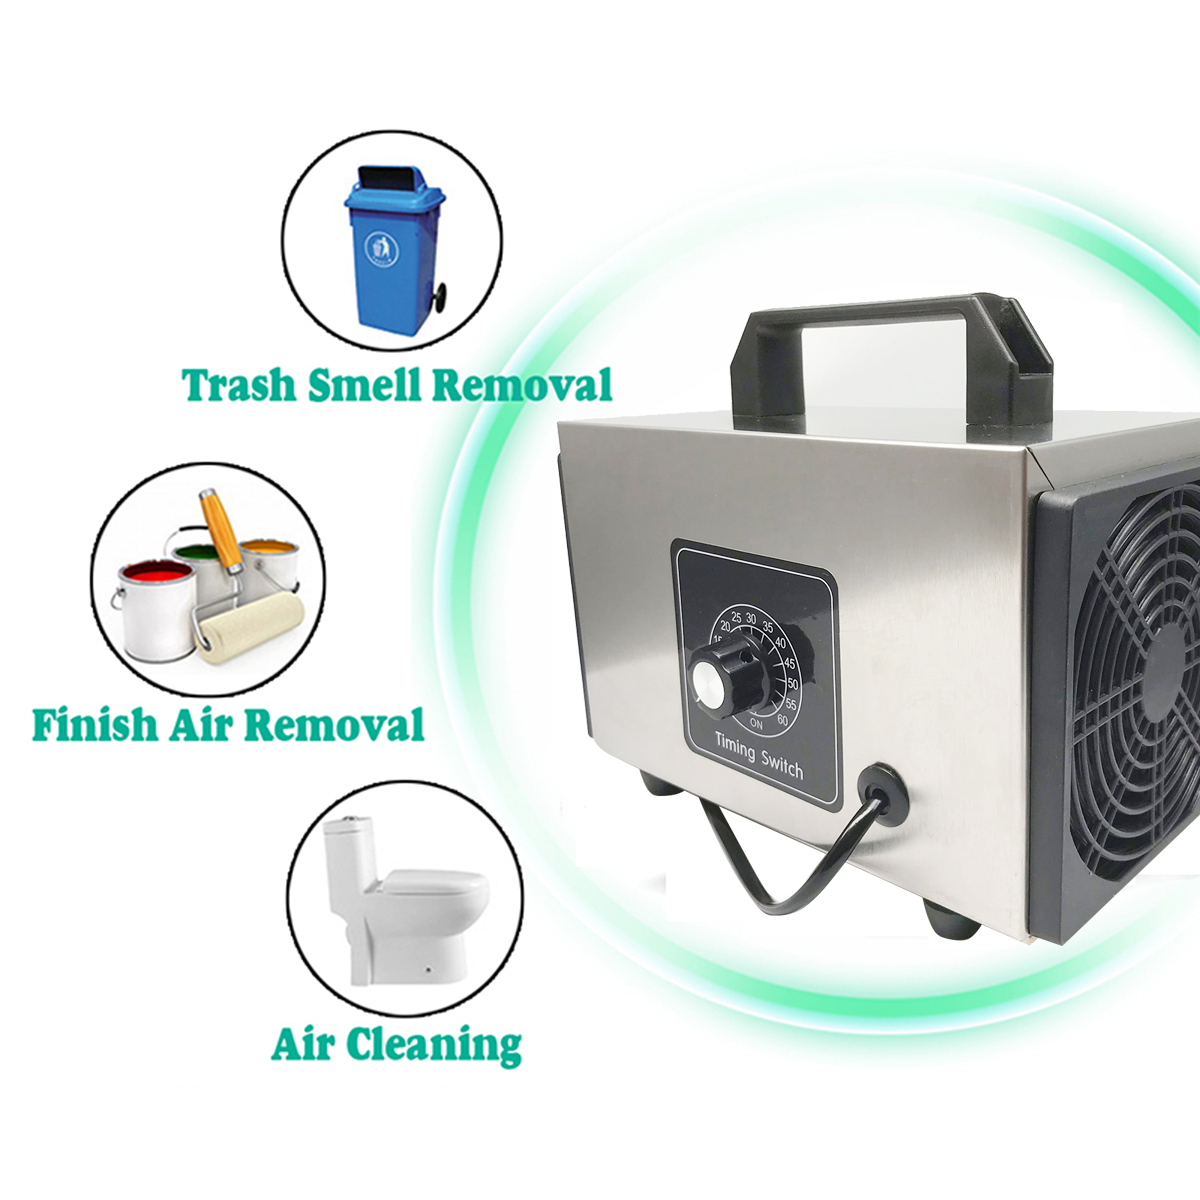 220V-Home-Ozone-Generator-Air-Purifier-Portable-Ozone-Machine-with-Timing-Switch-1698486-2